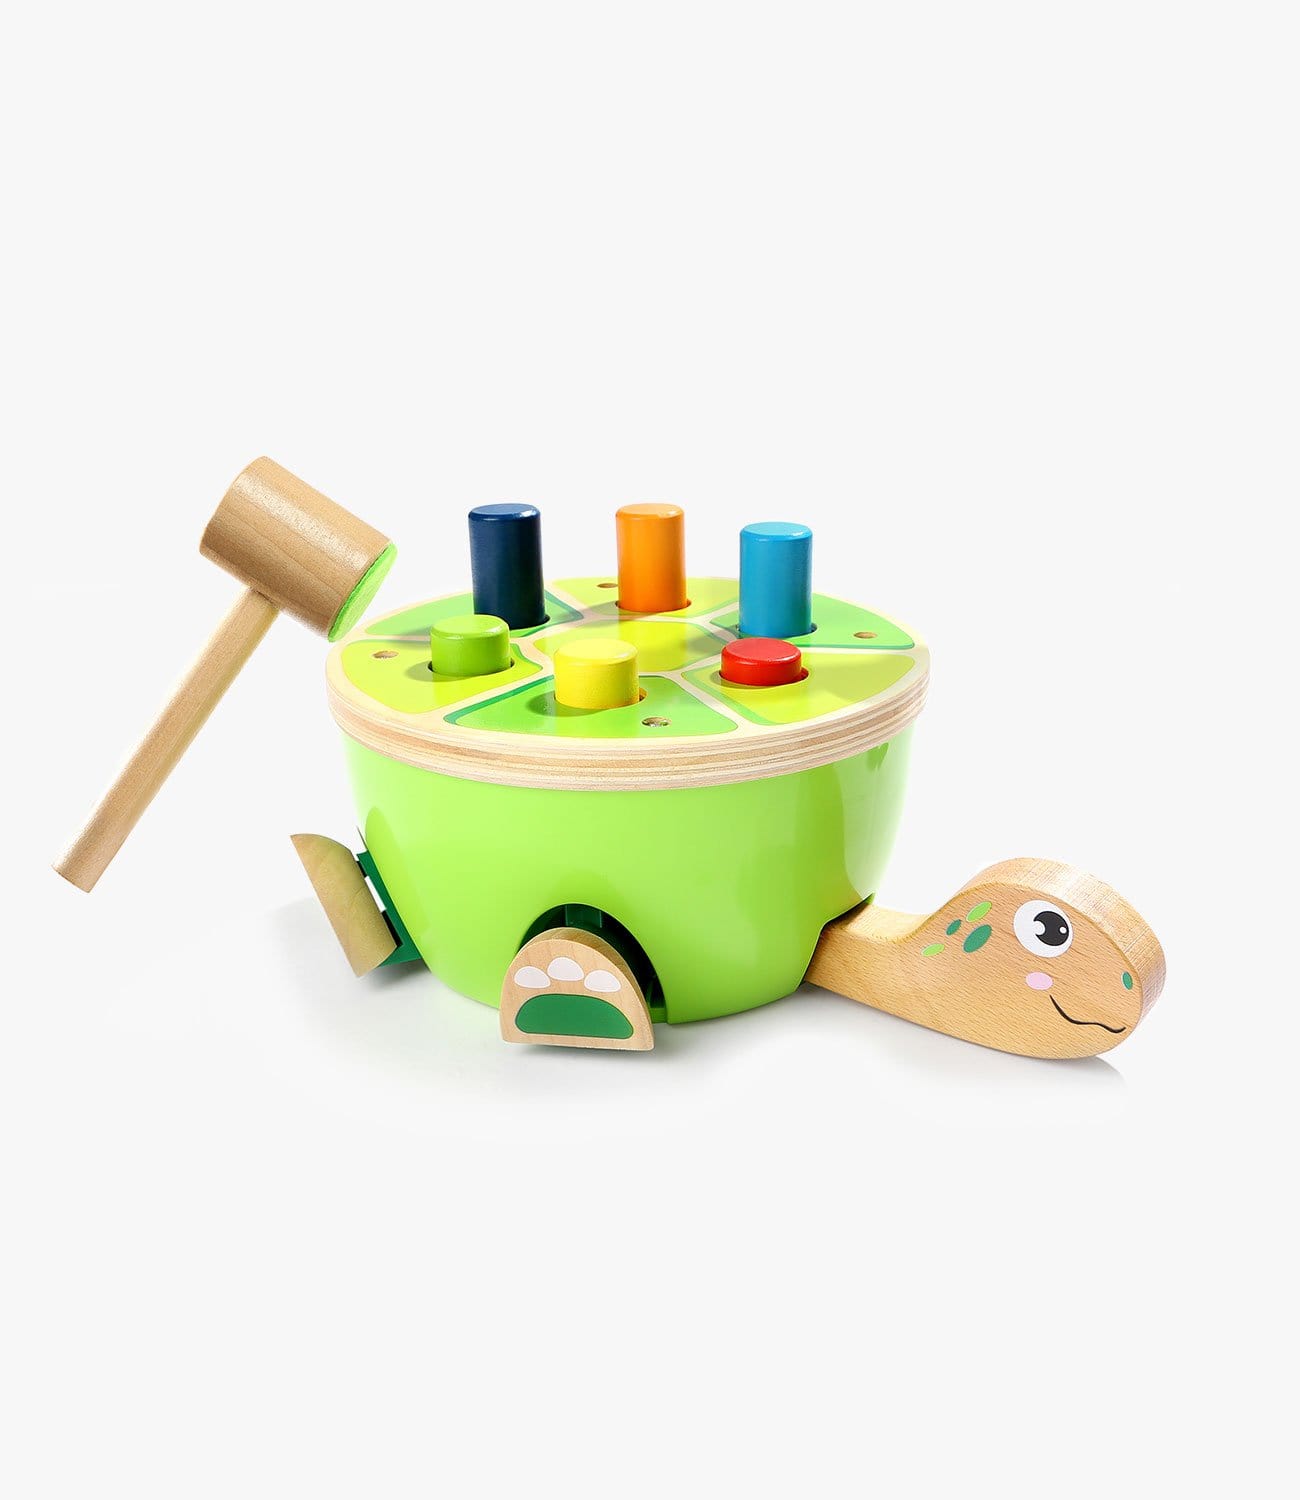 Turtle Pounding Bench - Motor & Senses | Top Bright by Top Bright Toys Toy